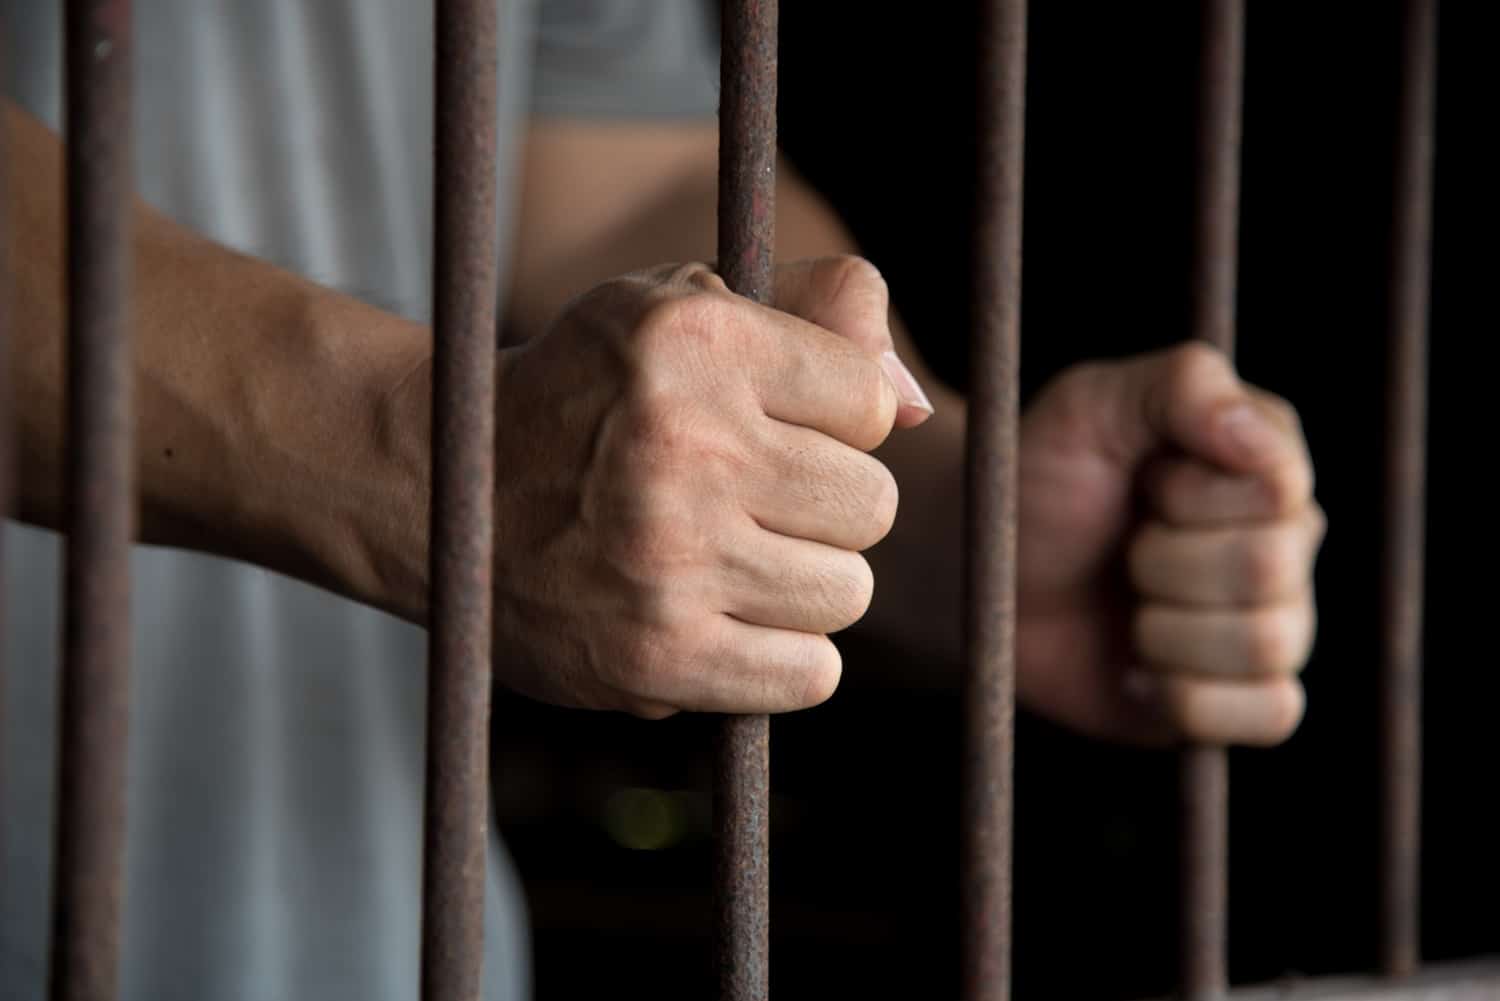 The hands of a prisoner in jail, holding onto their cell bars.